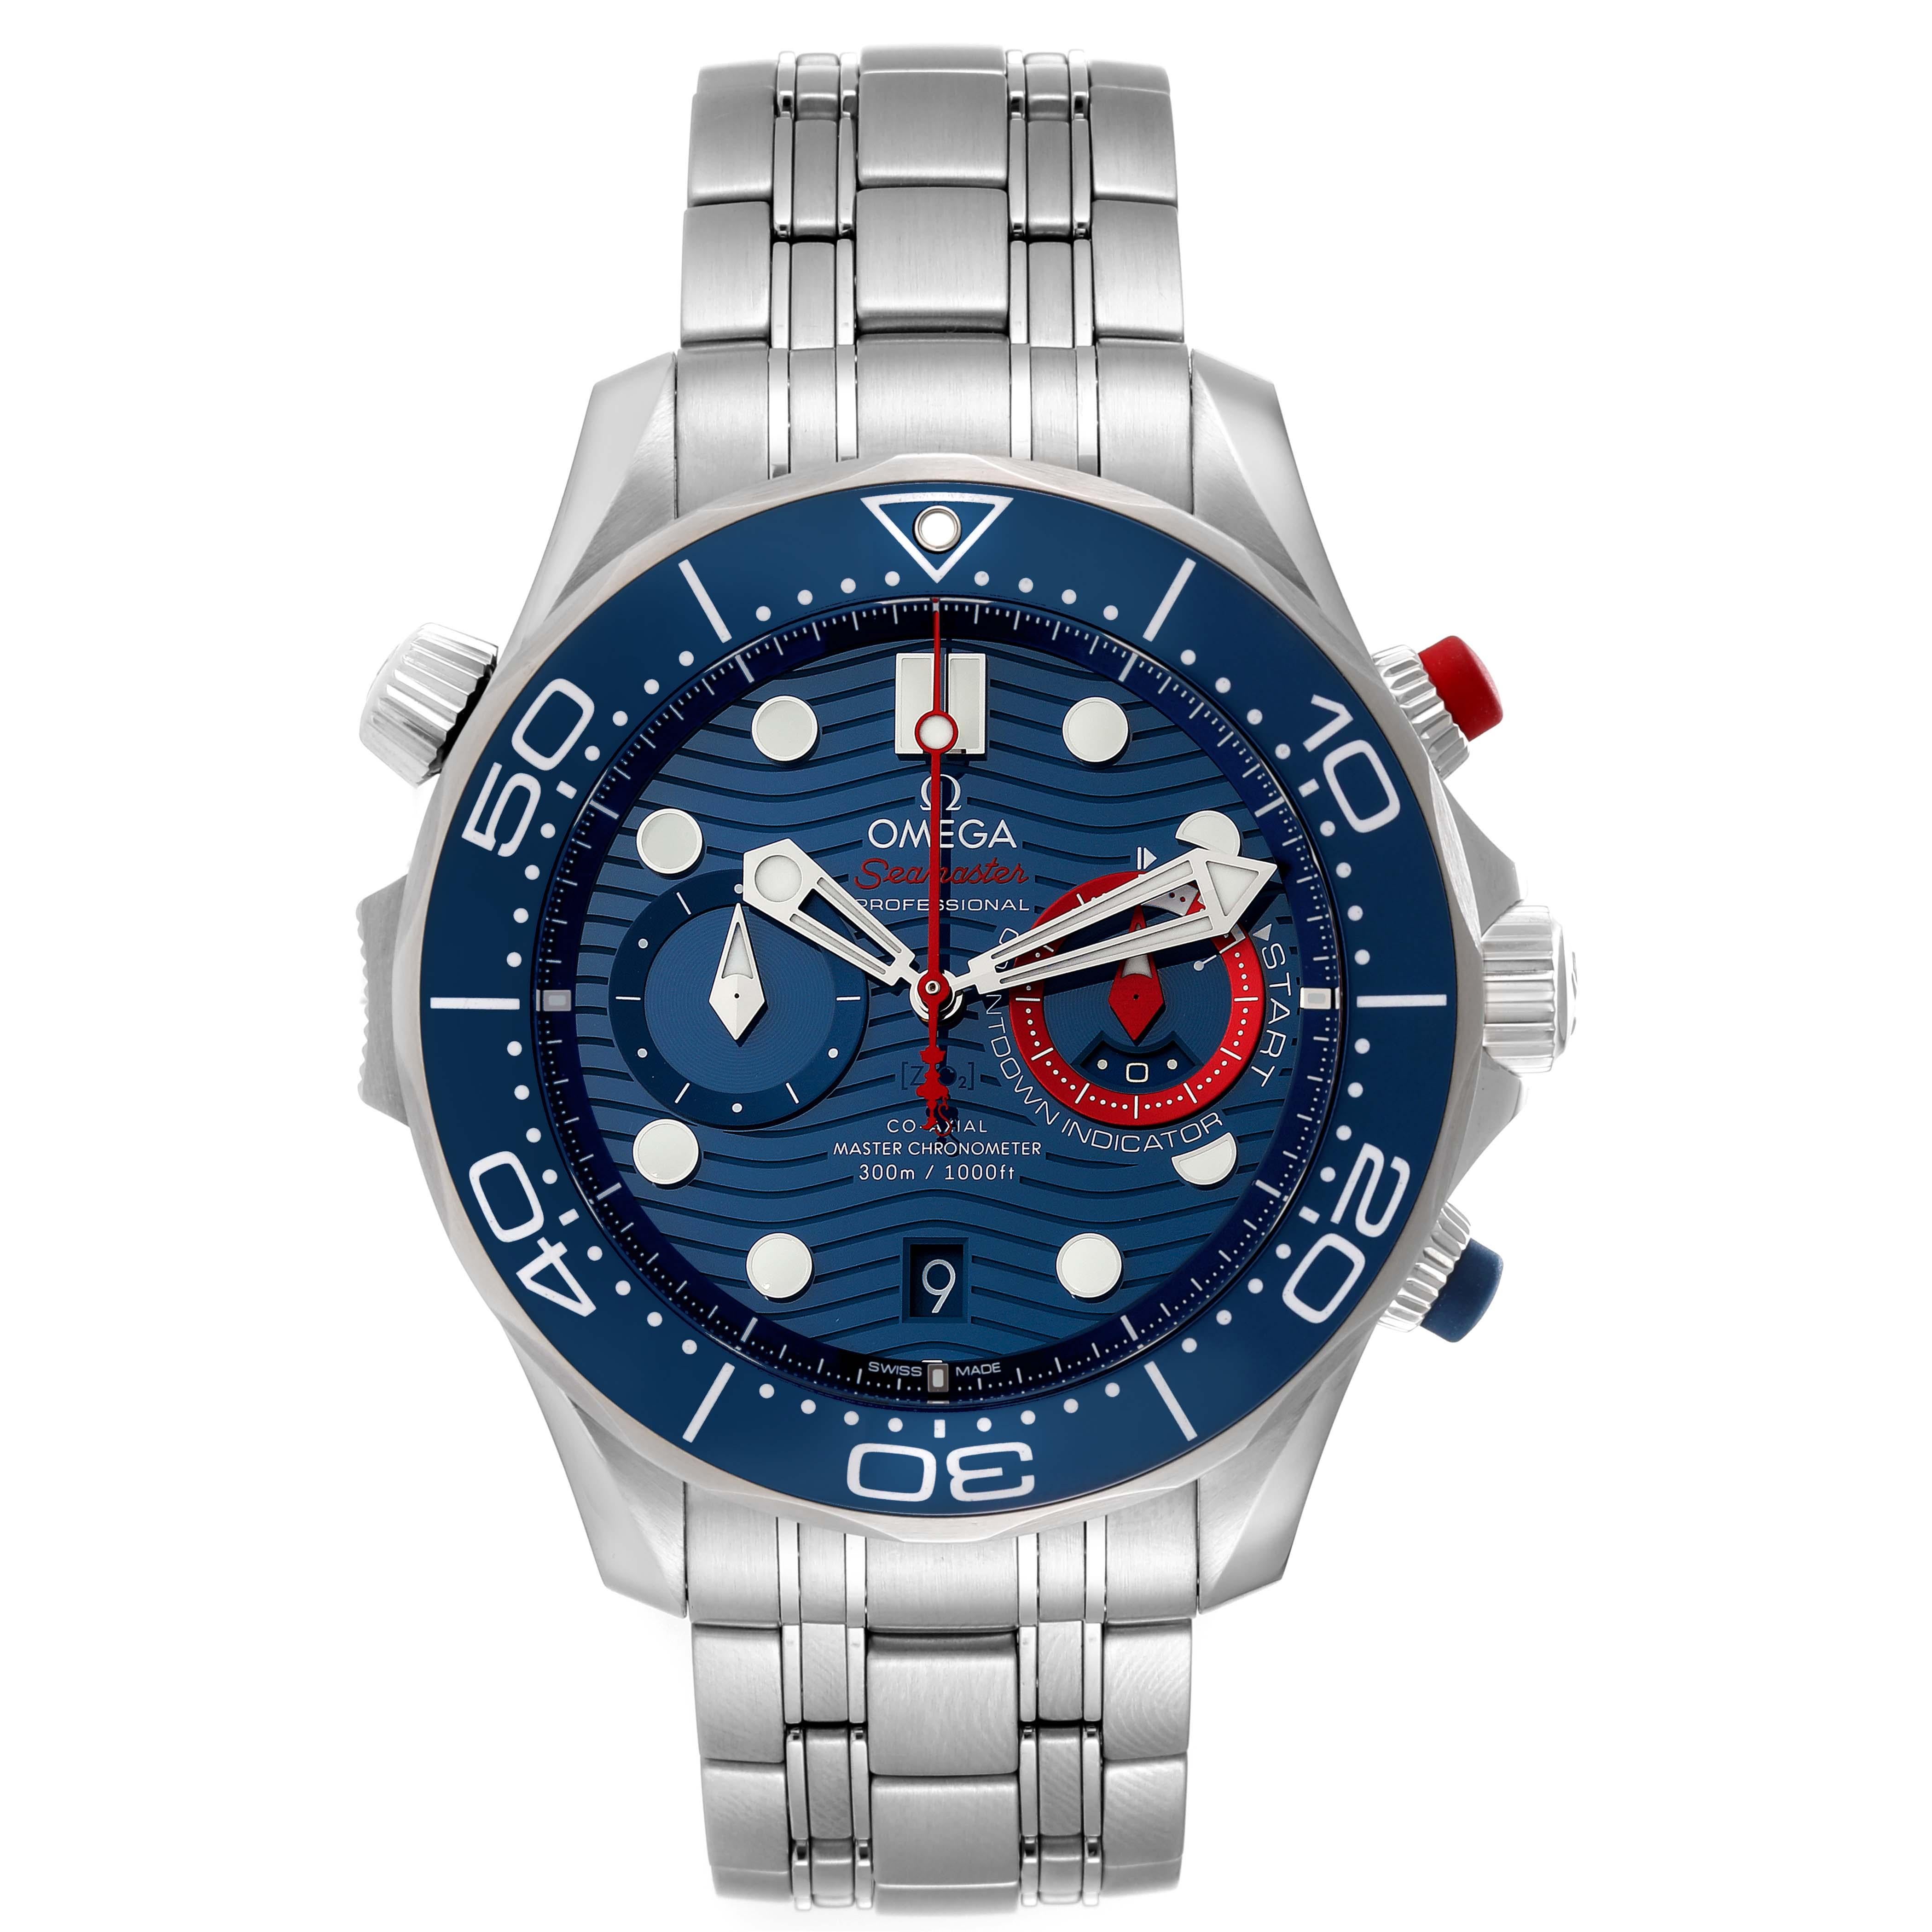 Omega Seamaster 44 Chronograph Steel Mens Watch 210.30.44.51.03.002 Box Card. Automatic Self-winding chronograph movement with column wheel and Co-Axial escapement. Certified Master Chronometer, approved by METAS, resistant to magnetic fields